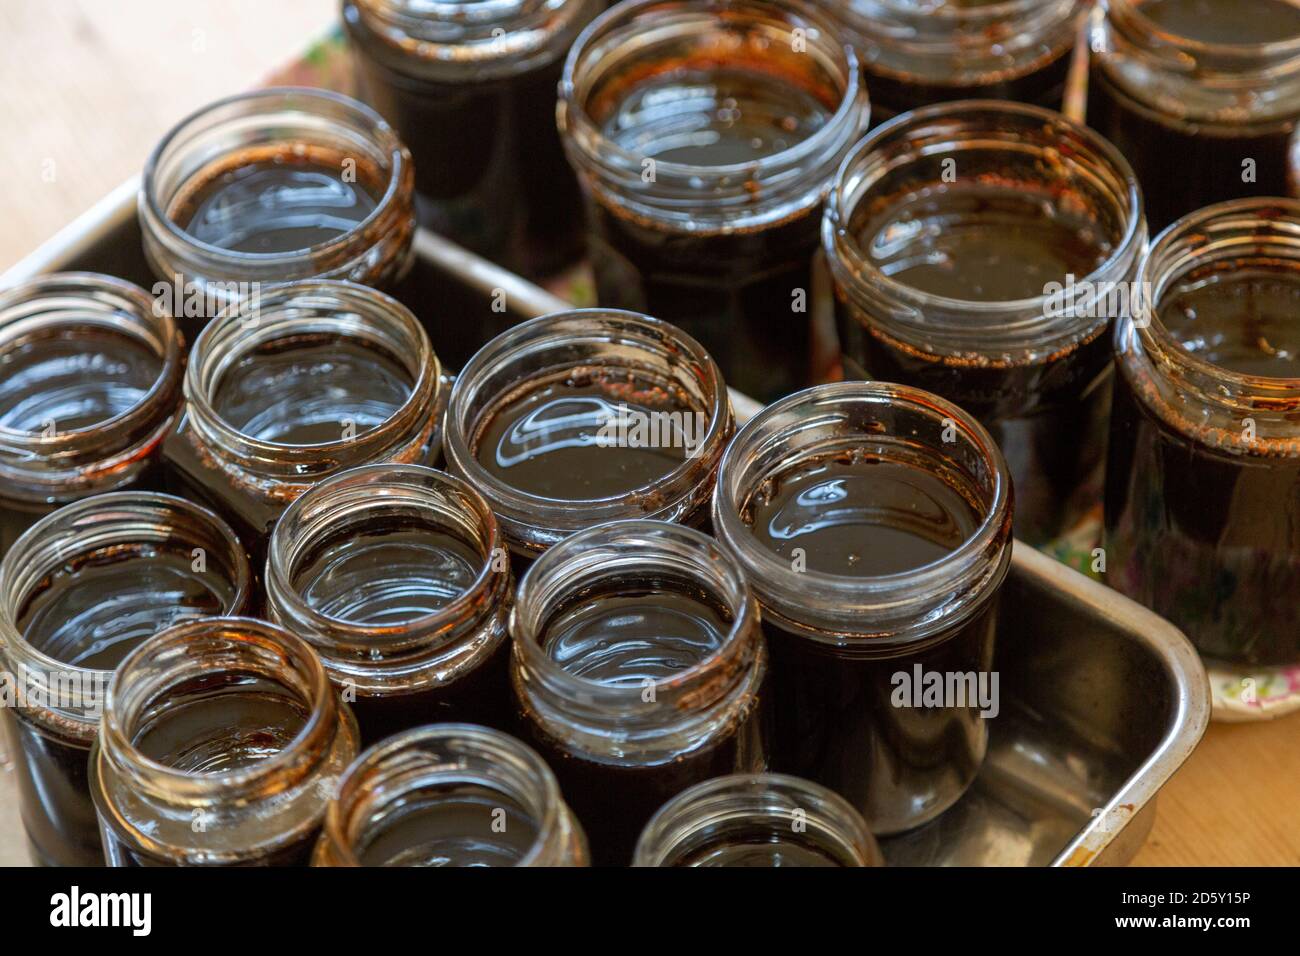 Open topped jam jars filled with setting dark liquid quince jam jelly homemade conserve Stock Photo